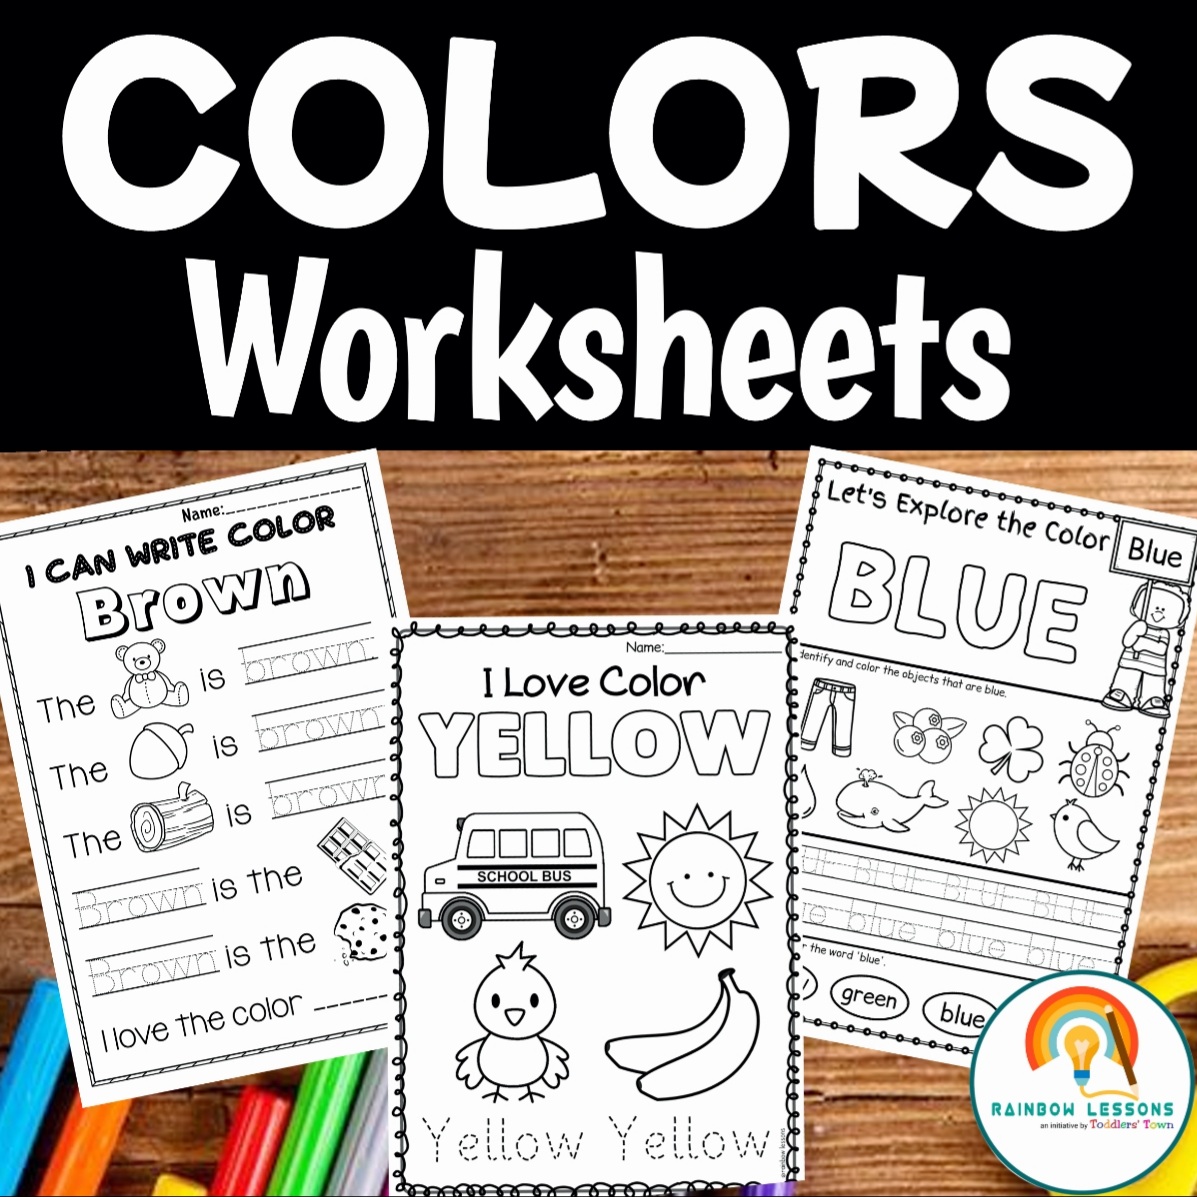 Learning color words worksheets coloring pages coloring sheets colors made by teachers